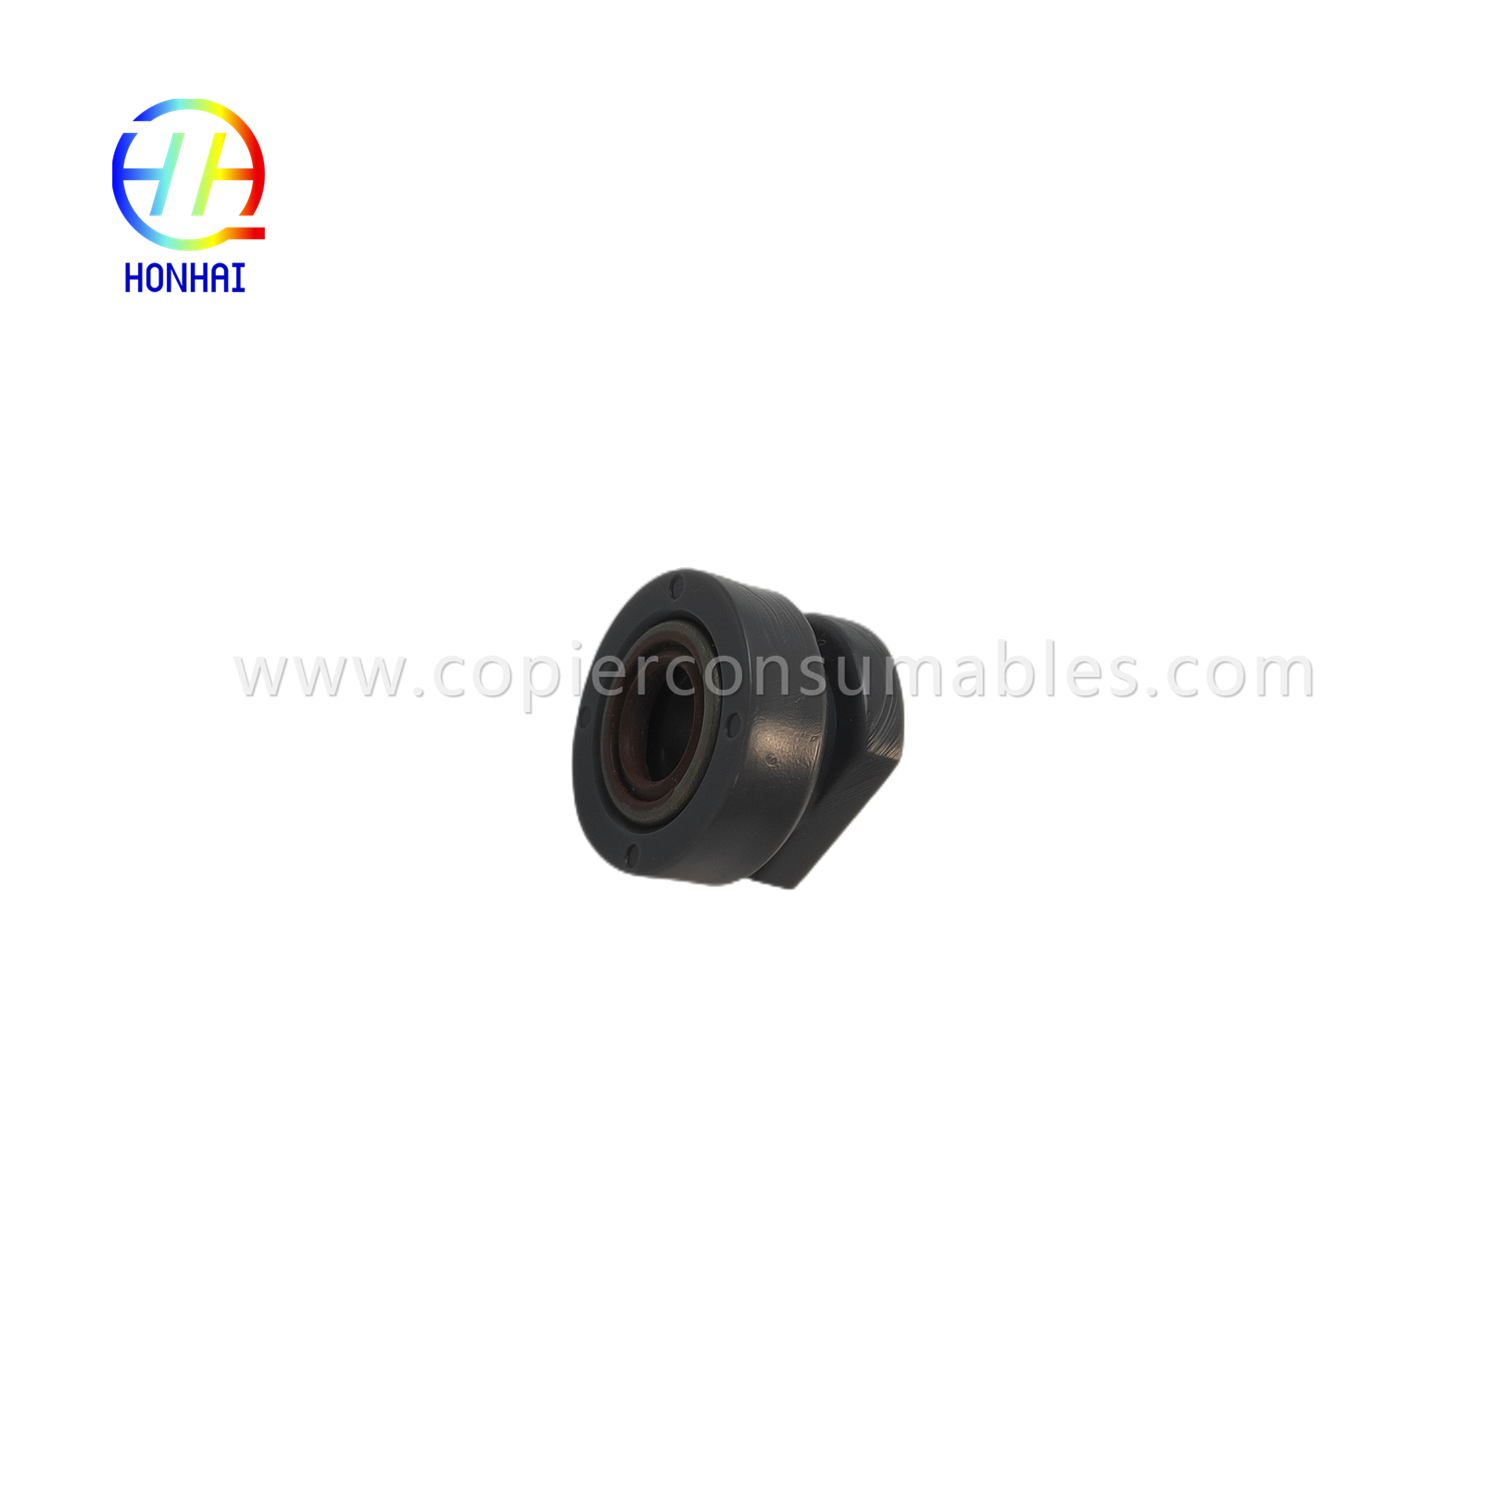 https://www.copierconsumables.com/developer-bushing-for-ricoh-af1015-af1018-1027-1022-2015-2016-2018-2027-2022-3030-3025-1015-aa087628-aa08-7628-bushing-product/